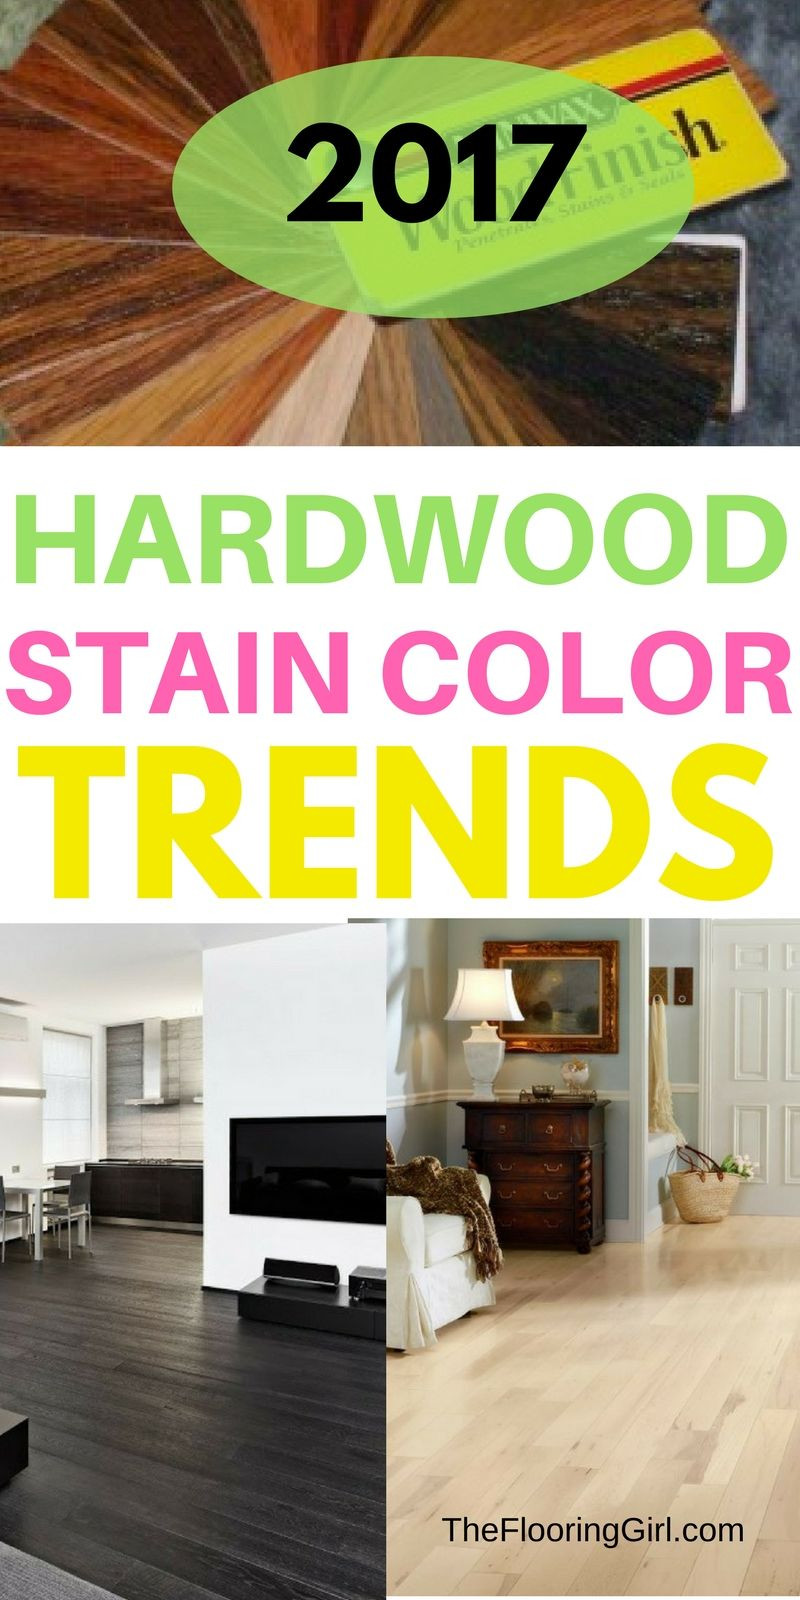 29 Stylish Hardwood Flooring Hardness Rating 2024 free download hardwood flooring hardness rating of hardwood flooring stain color trends 2018 more from the flooring with hardwood flooring stain color trends for 2017 hardwood colors that are in style the